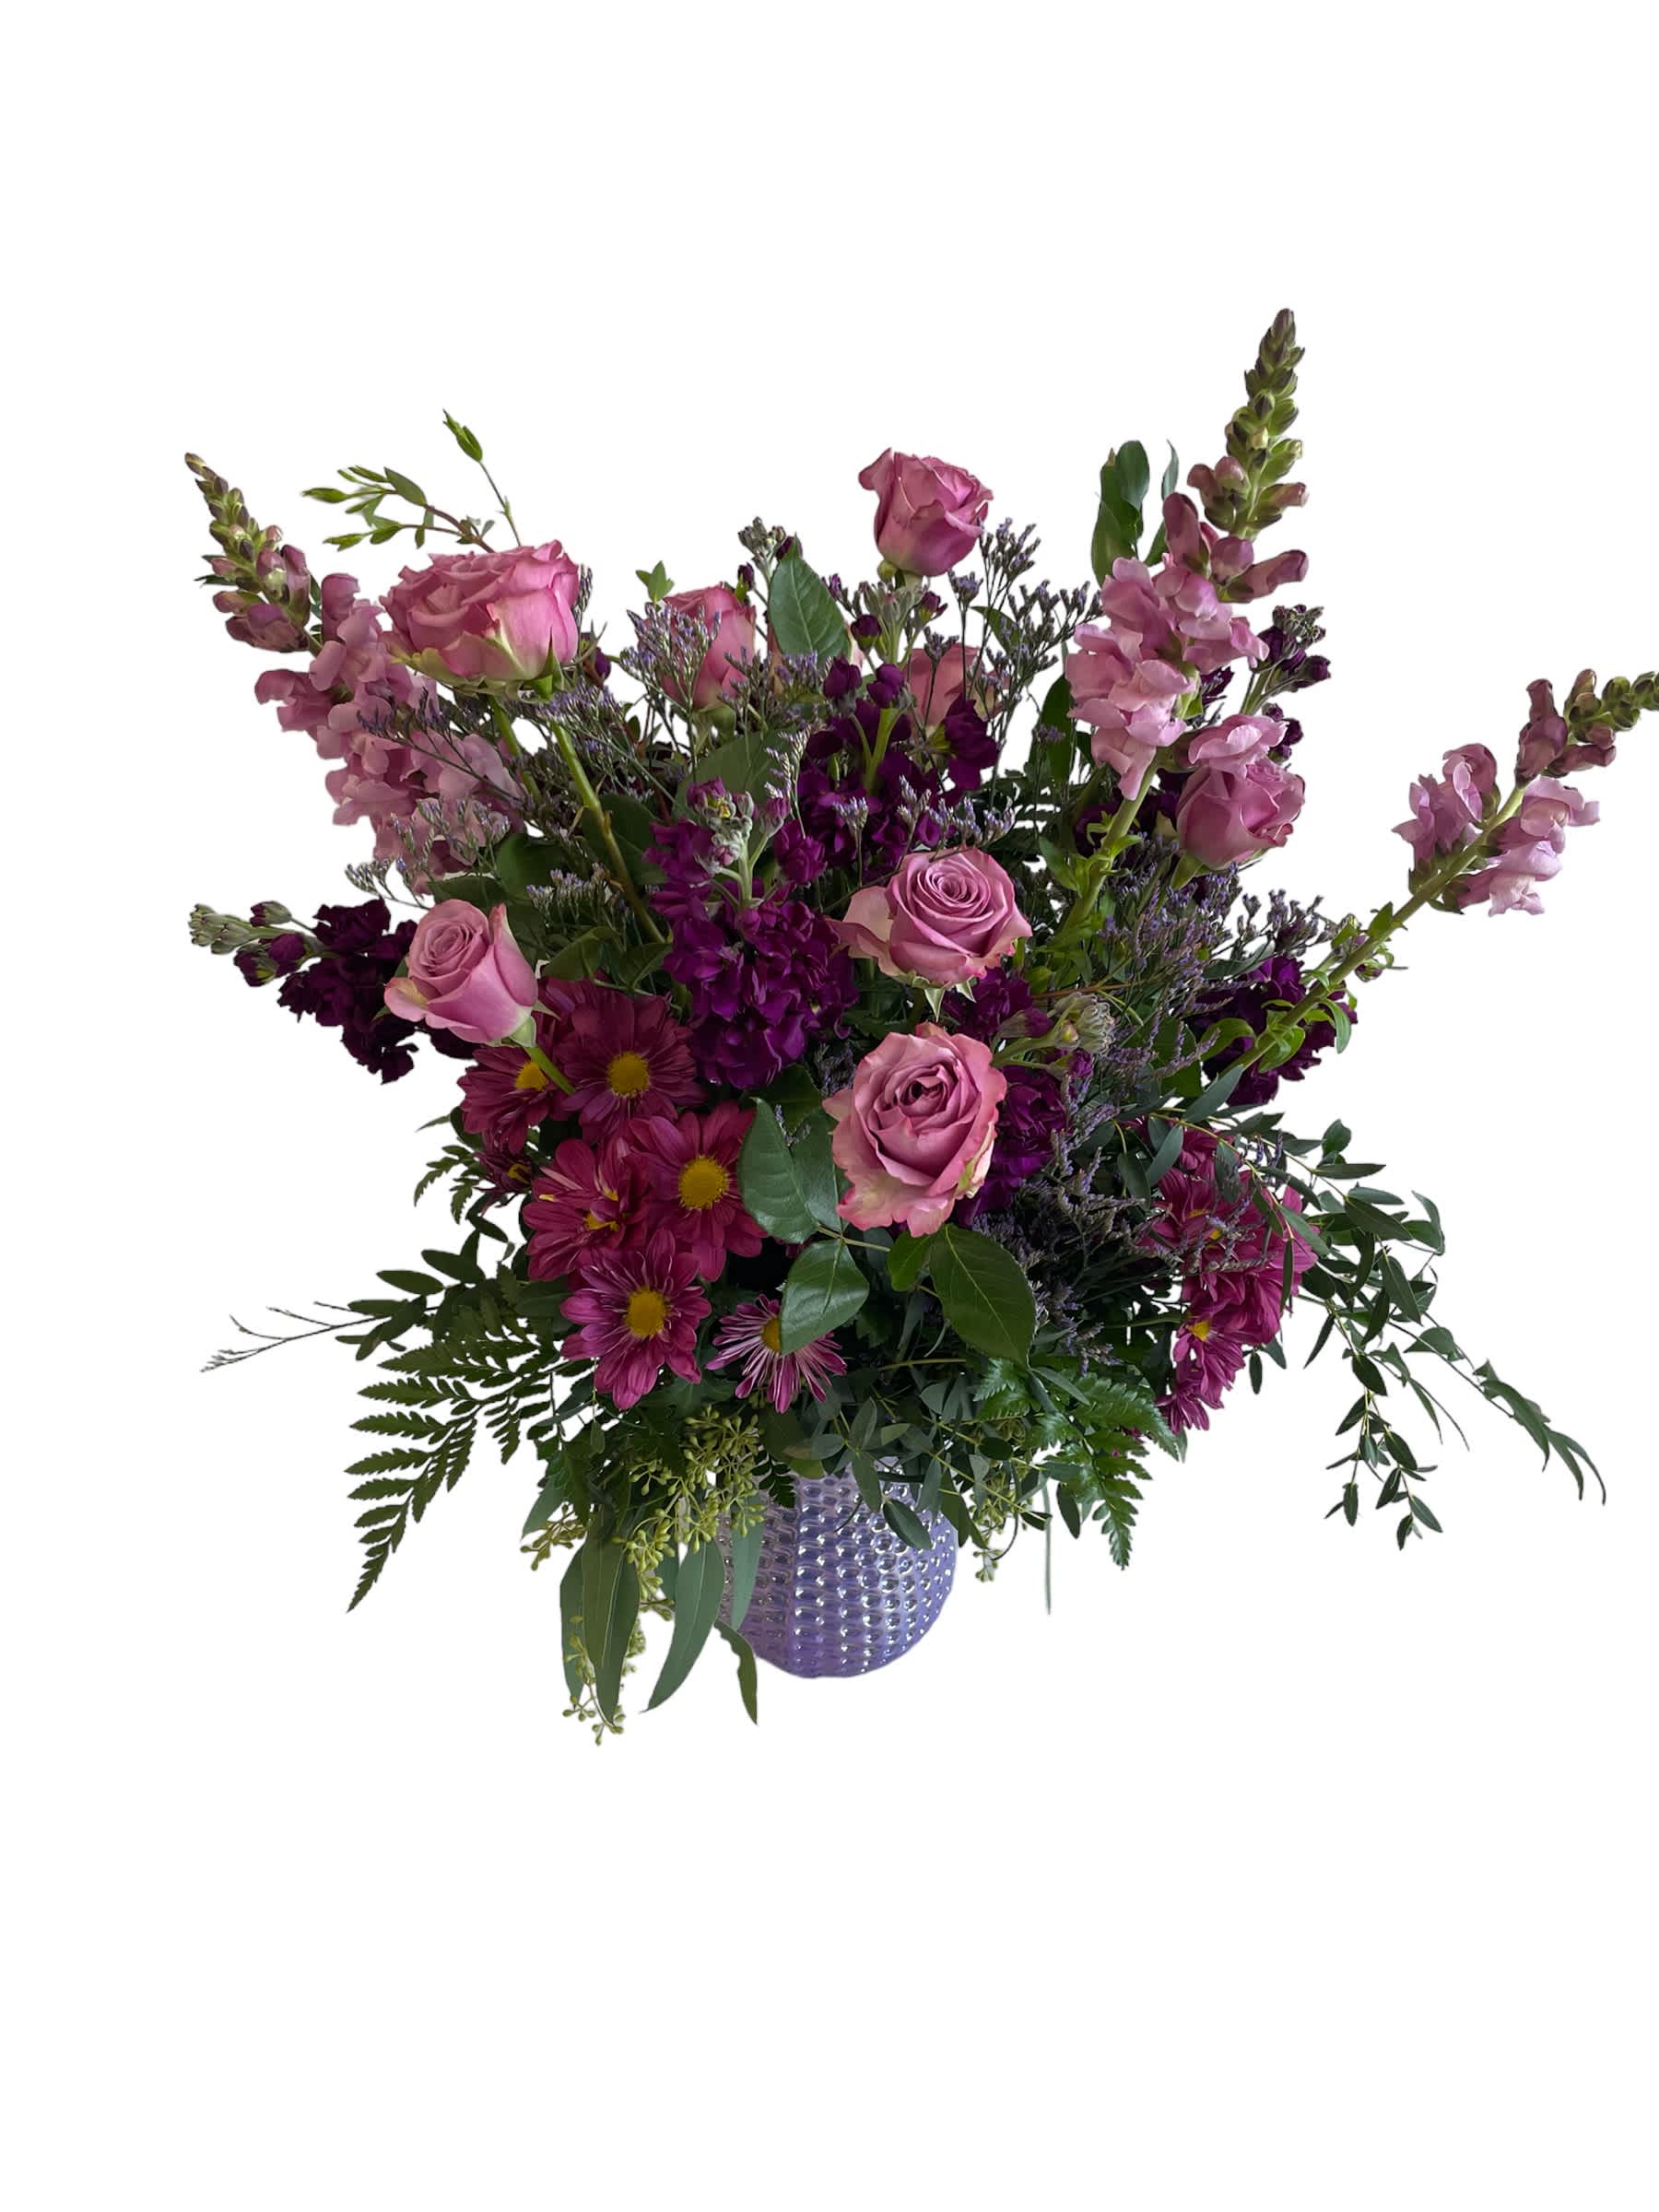 Purple Passion - If you love purple you NEED this arrangement! Mix of purple roses and daisies in a delightful purple vase!